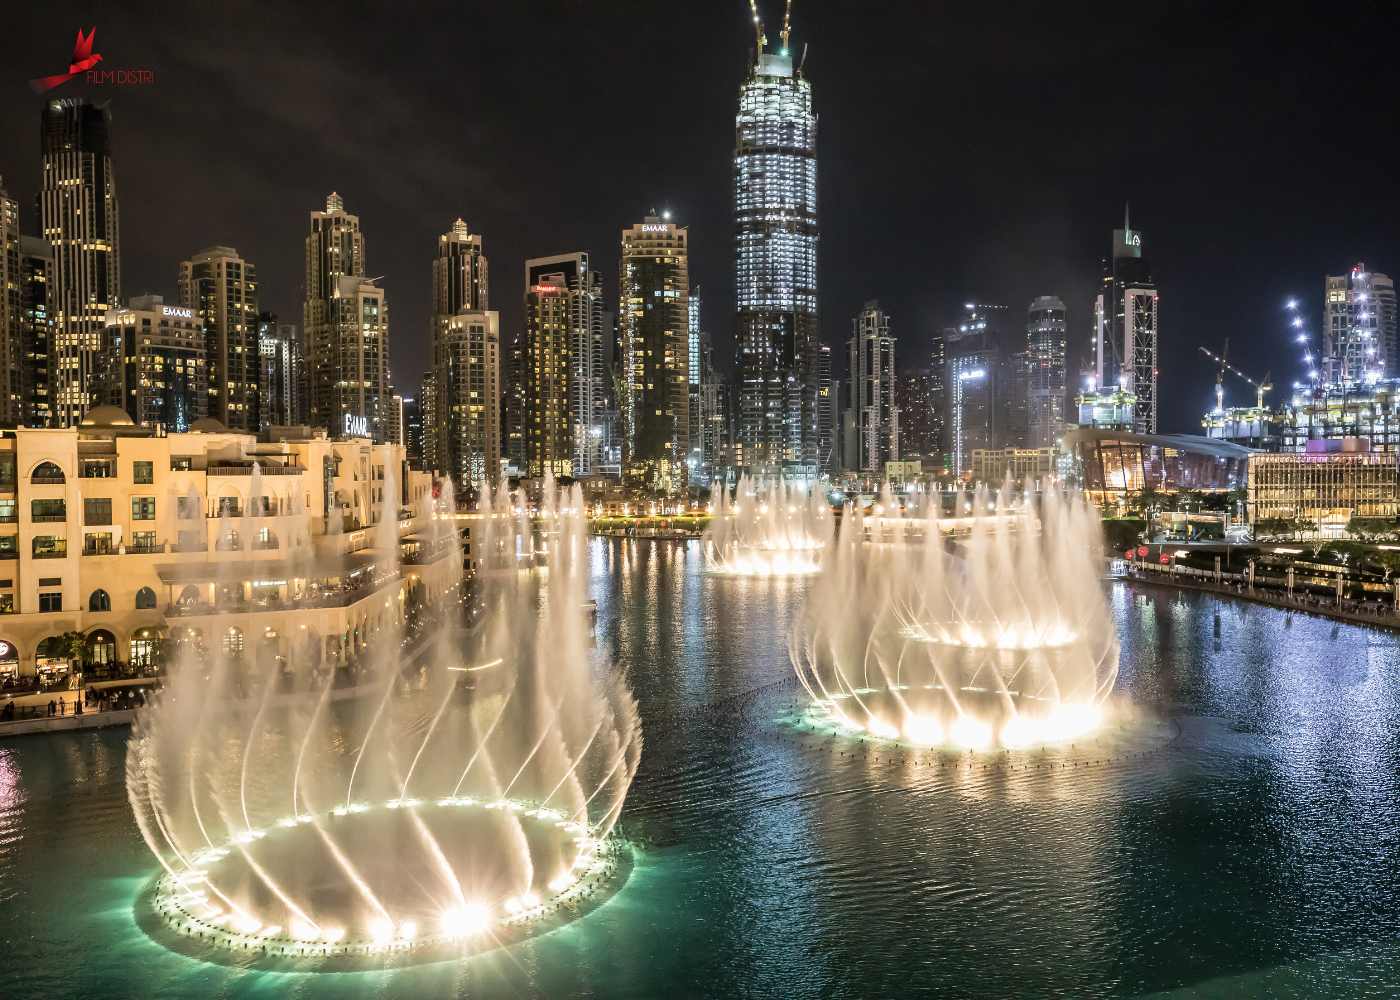 15 Concerts and Events Coming To Dubai In 2022